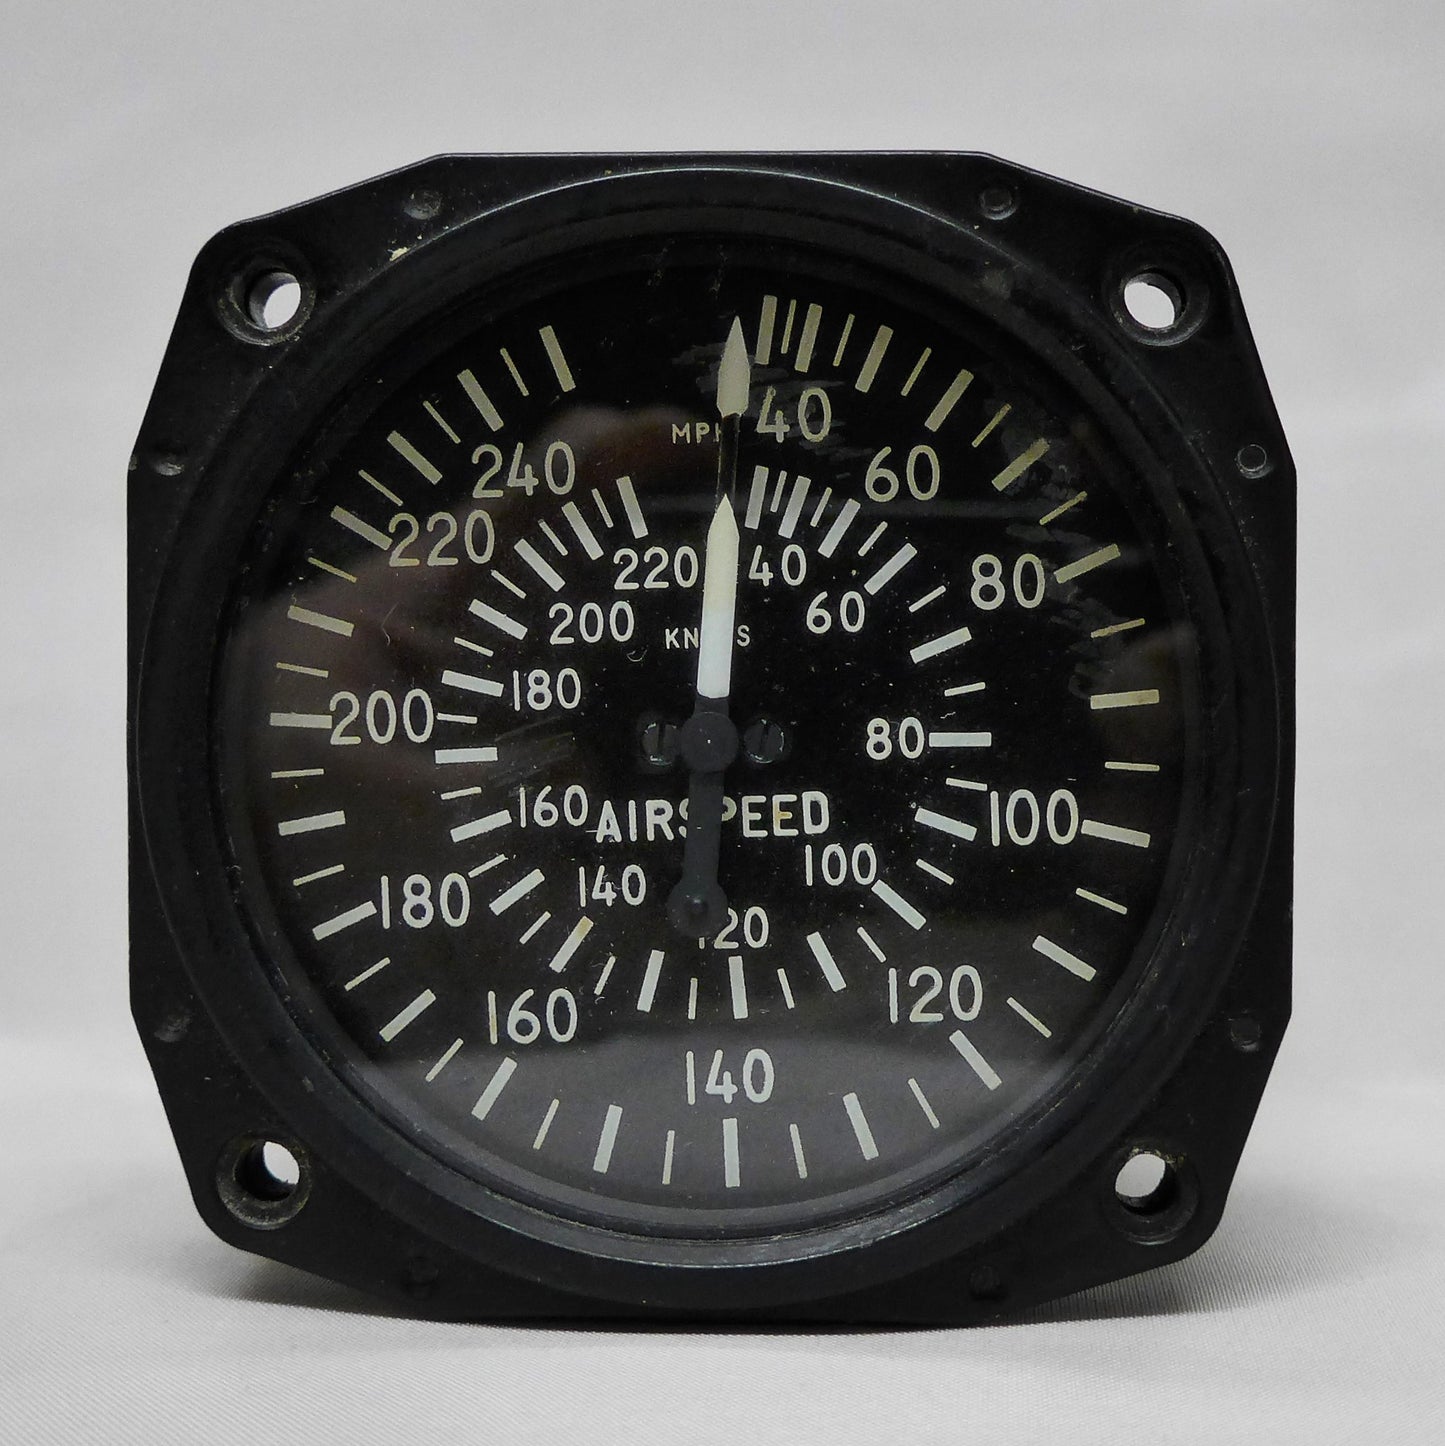 Dual Dial Airspeed Indicator 30-250 mph/30-220 Knots (A/R)